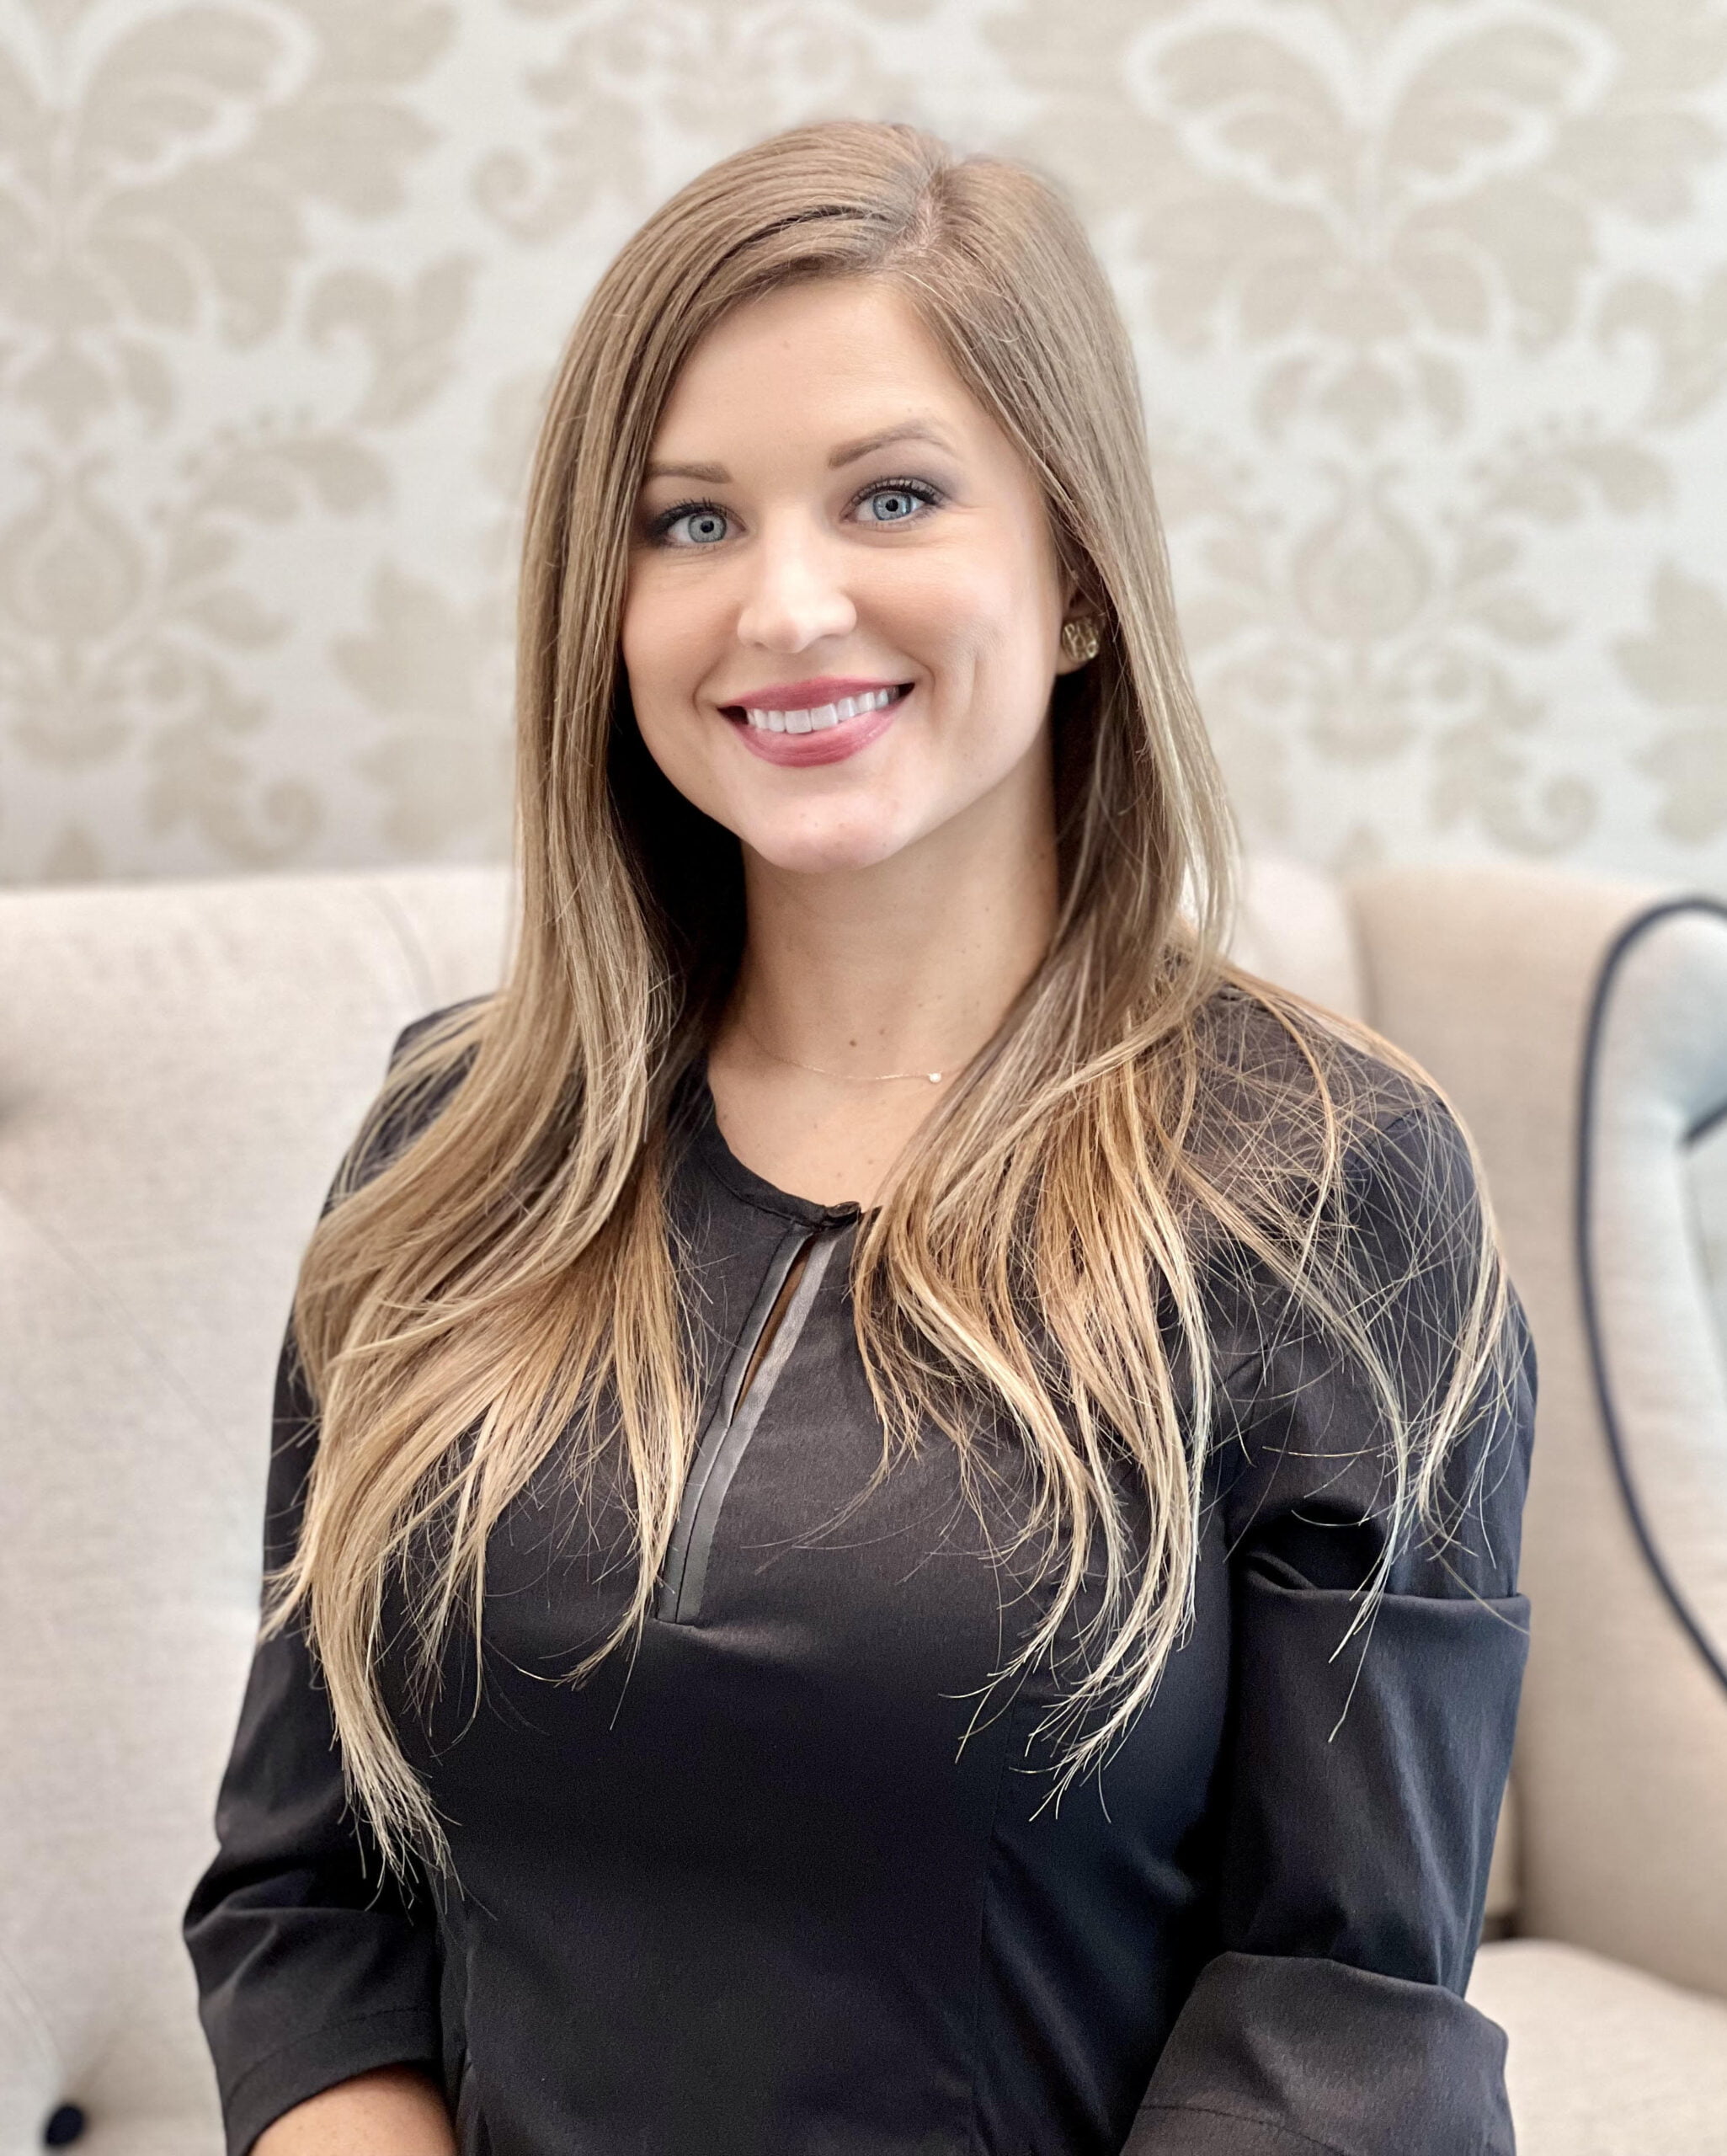 Megan, Licensed Aesthetician at Fort Worth Medical Spa Kalos Medical Spa of Kirby Plastic Surgery